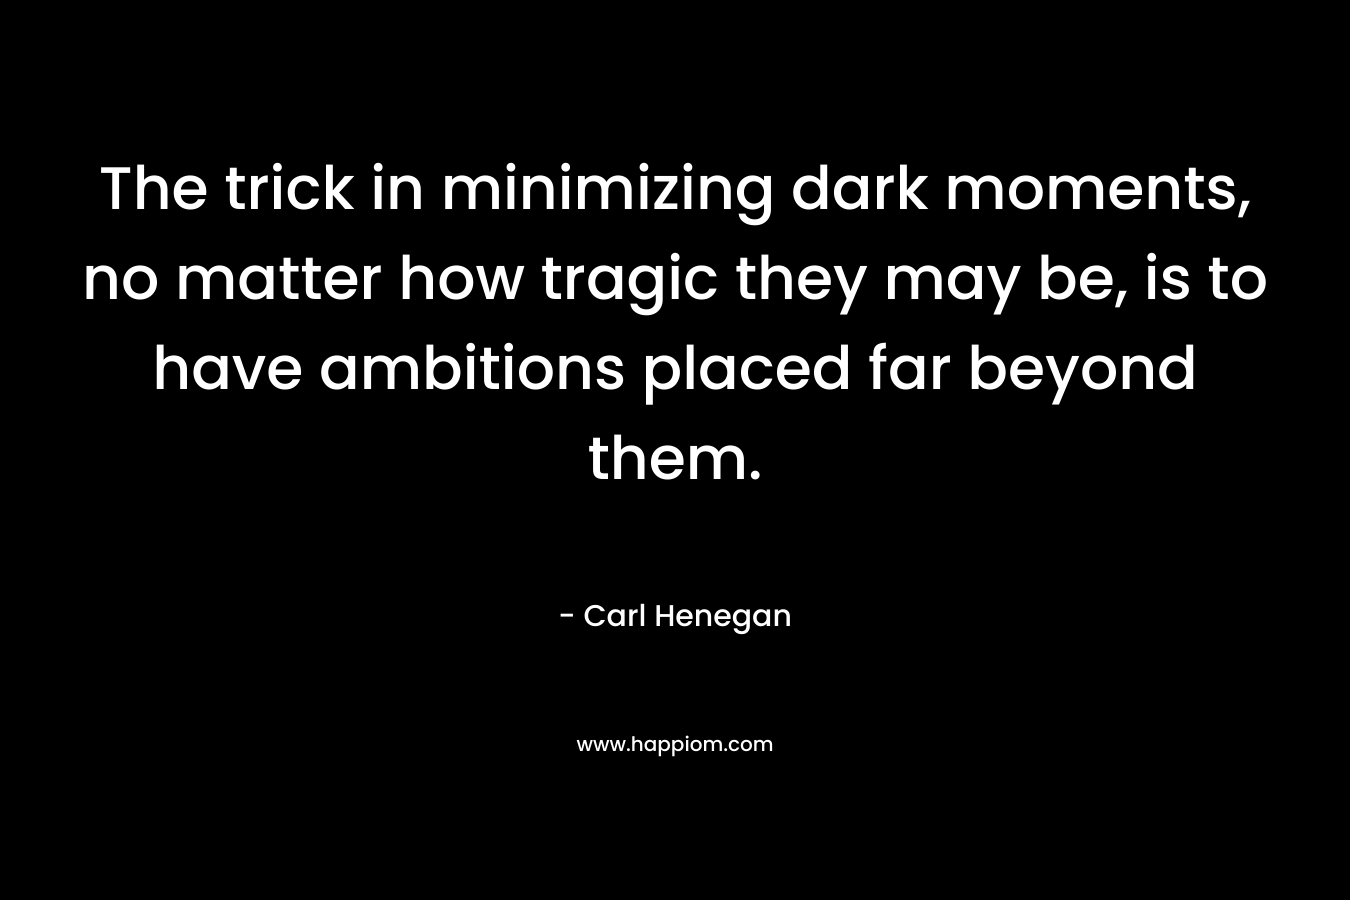 The trick in minimizing dark moments, no matter how tragic they may be, is to have ambitions placed far beyond them. – Carl Henegan